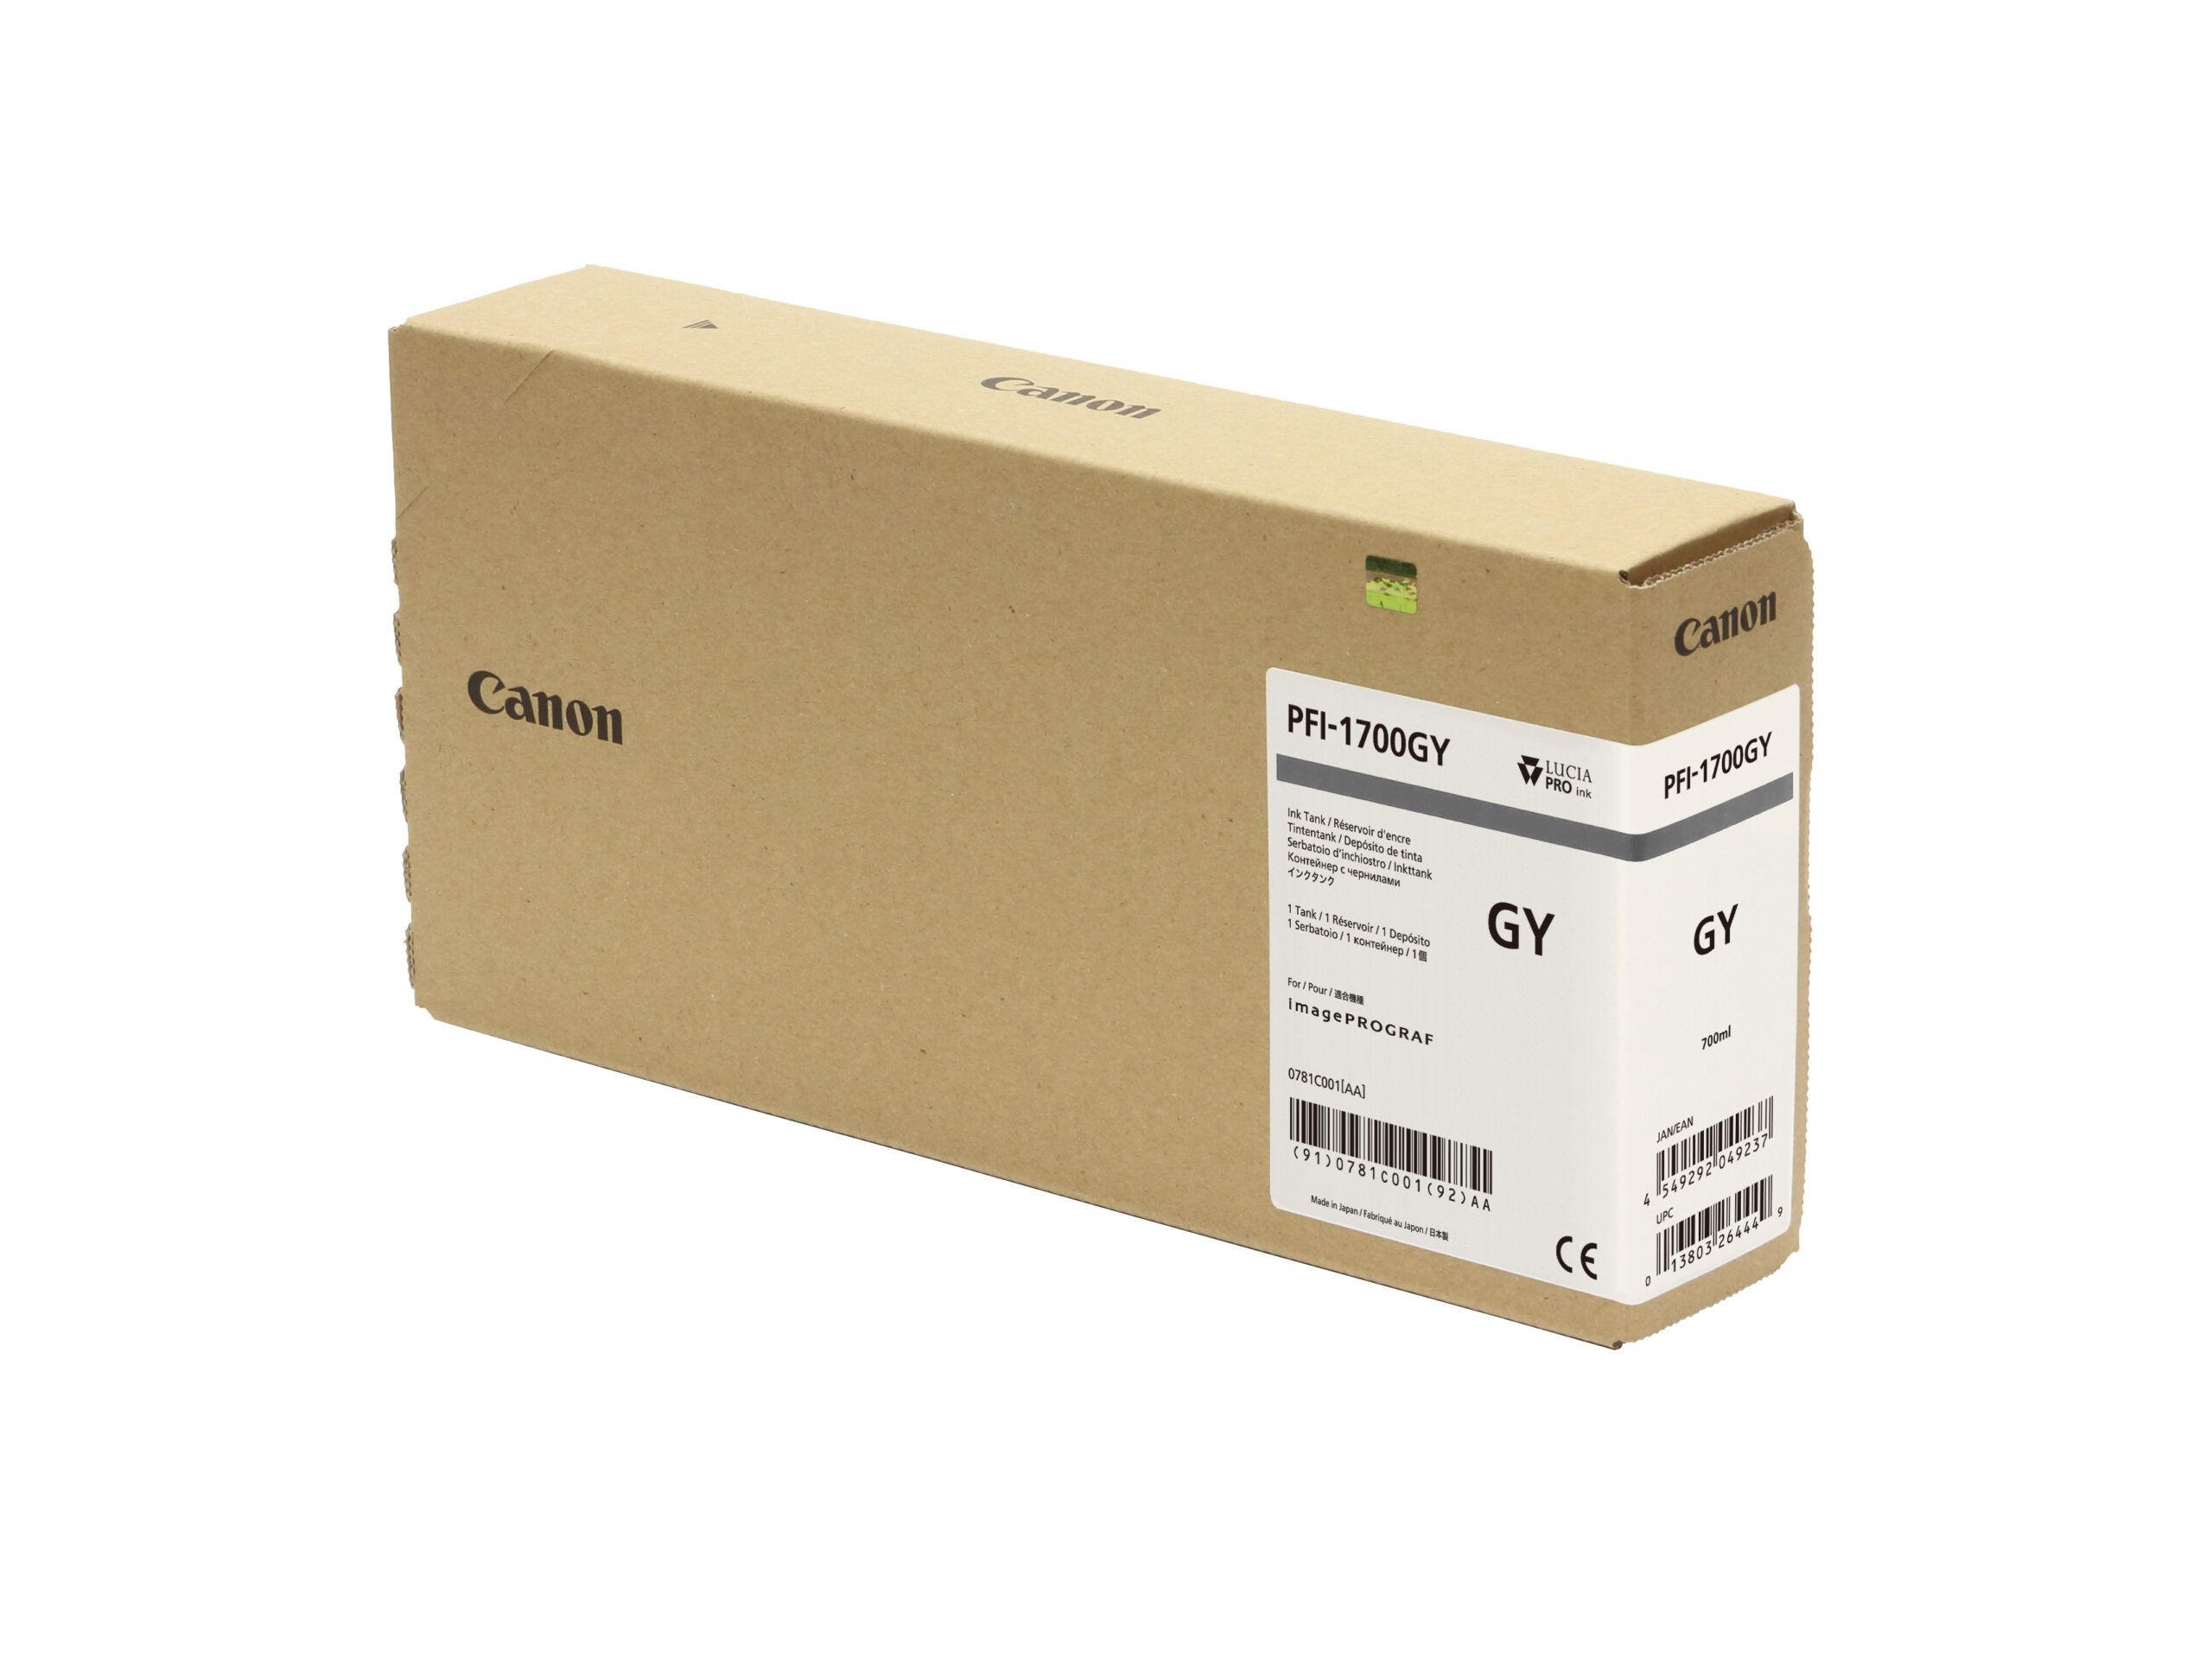 Canon PFI-1700GY Grey Ink Tank - 700ml Cartridge - for Canon PRO-2000, PRO-4000, PRO-4000S & PRO-6000S Printer - 0781C001AA - next day delivery from GDS Graphic Design Supplies Ltd